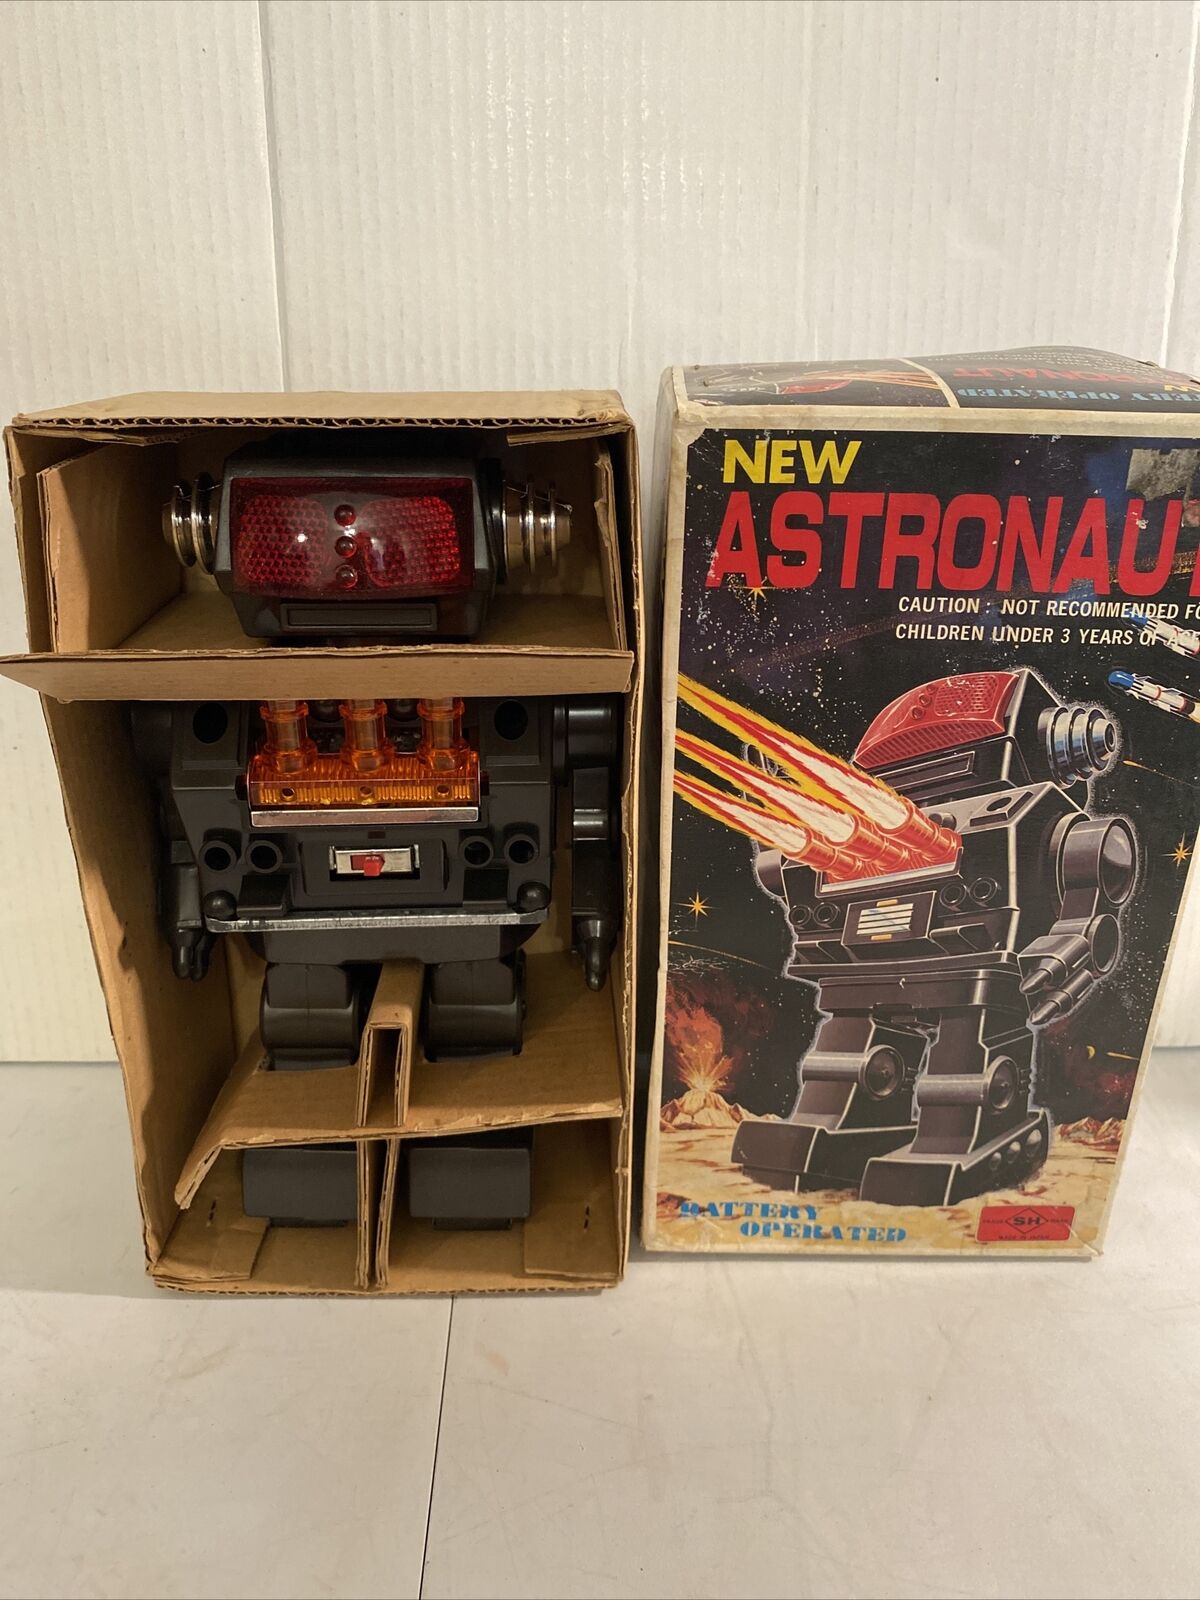 Sh Japan Battery Operated Vintage New Astronaut Robot In Original Box W/ Inserts